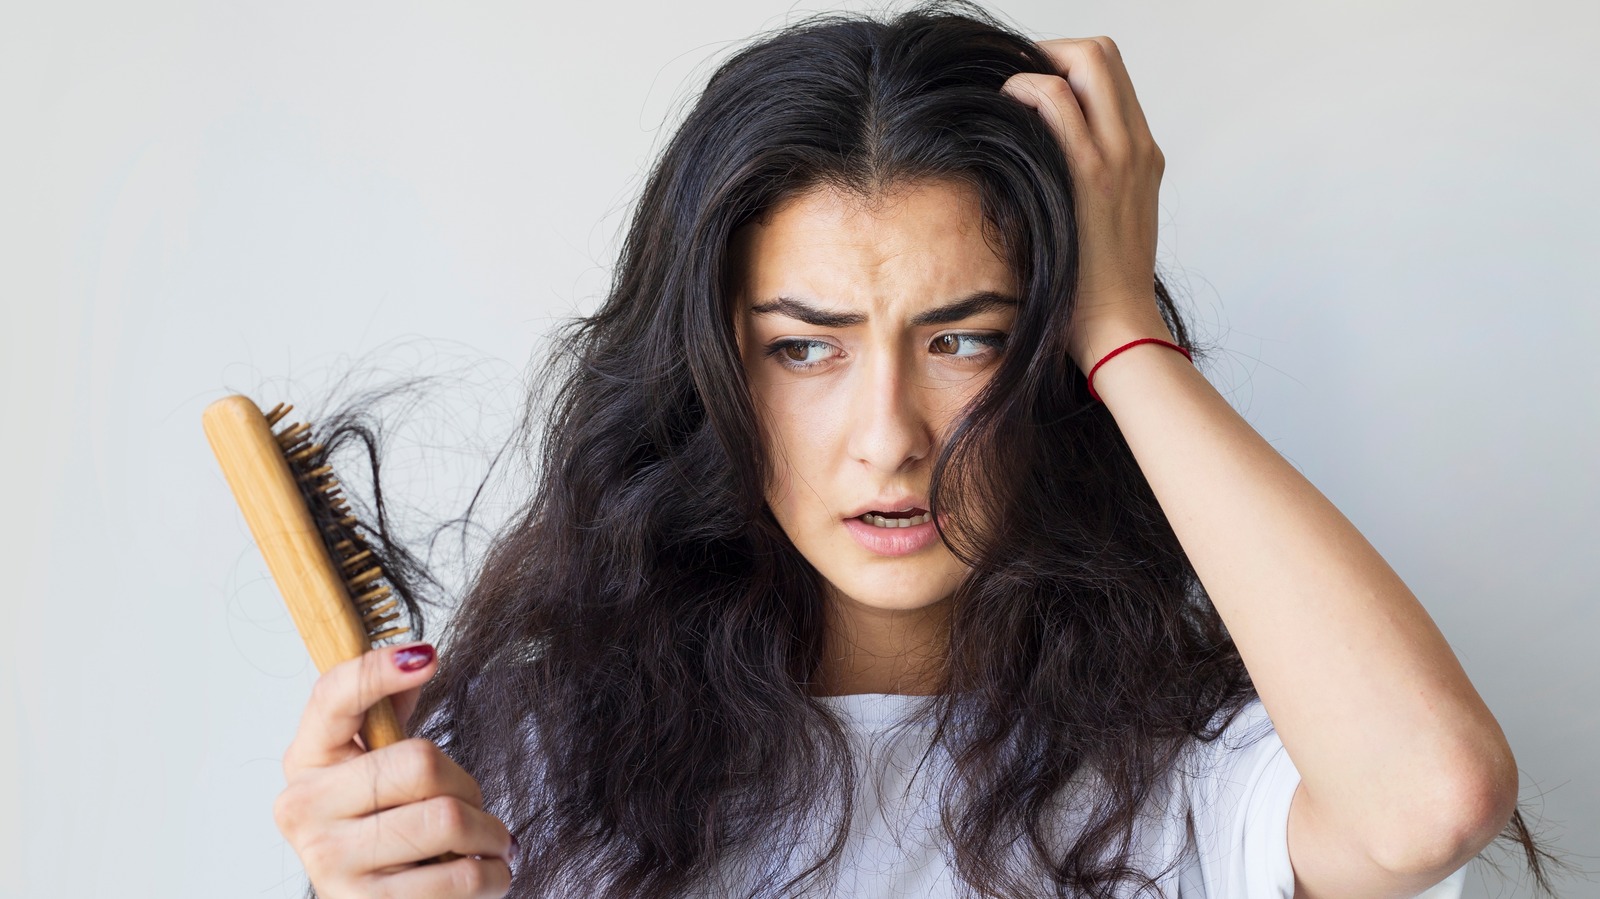 Can Sudden Weight Loss Cause Hair Loss?